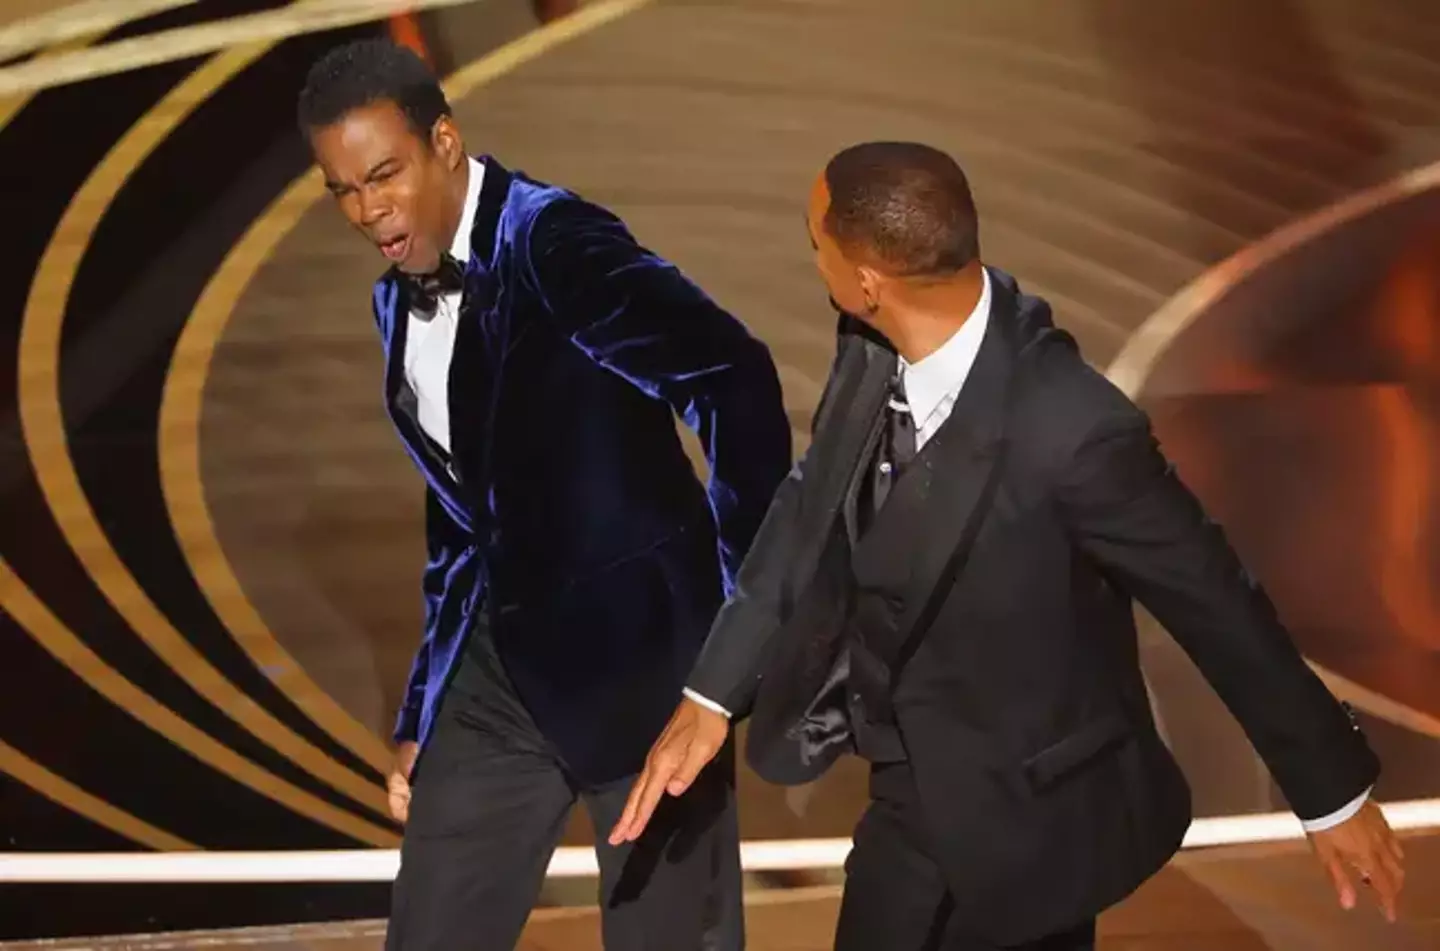 Will Smith slapped Rock at the Oscars, creating one of the most talked about moments in Oscars history.